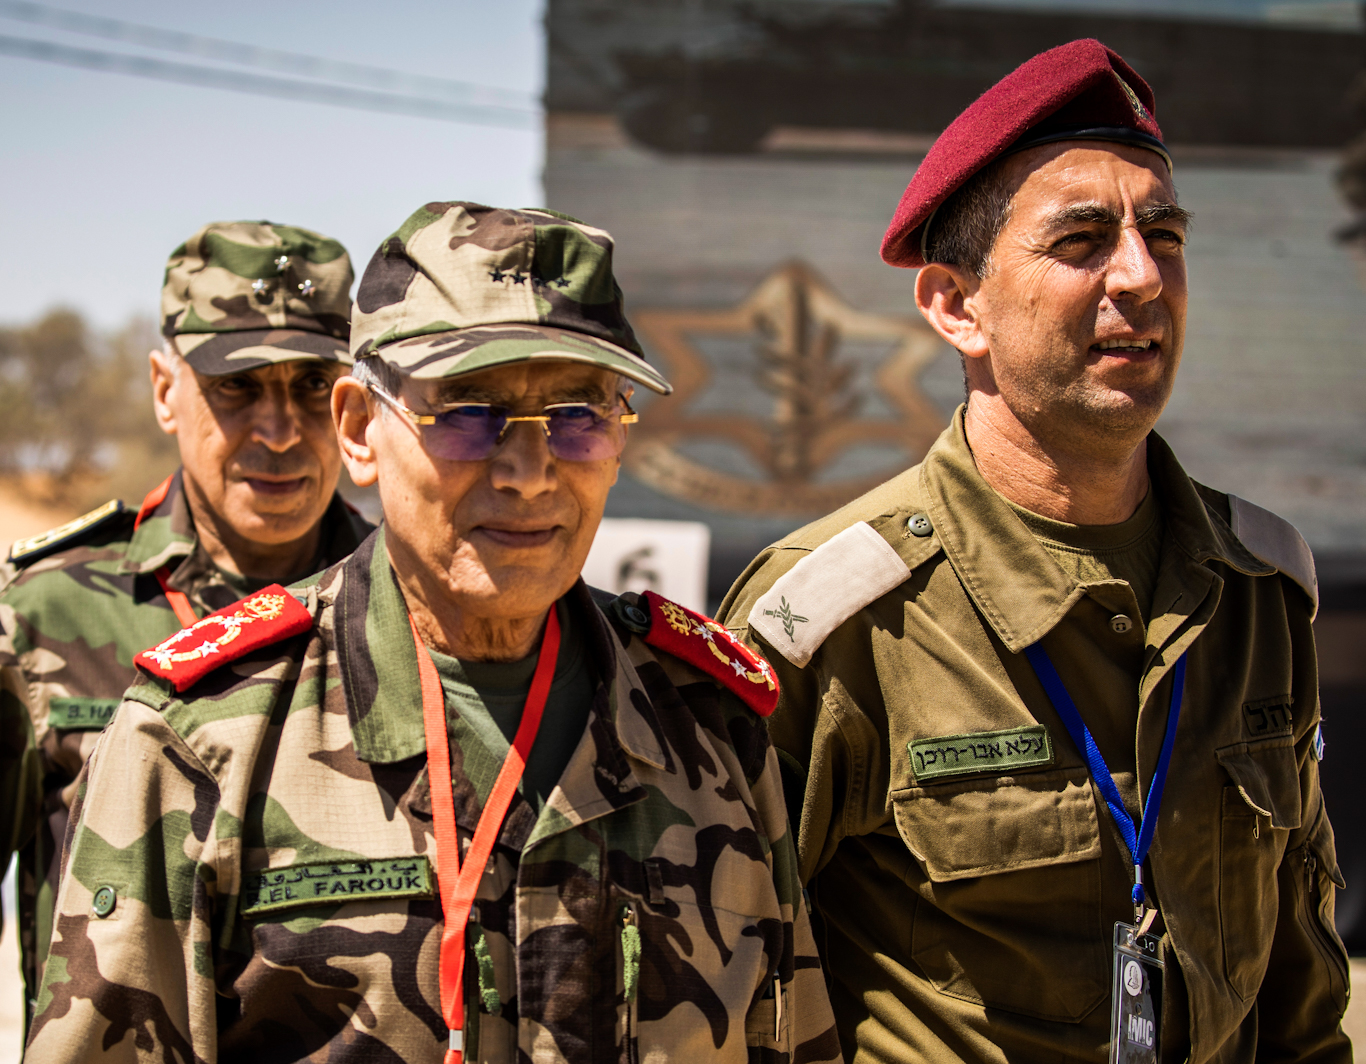 Moroccan General Belkhir El Farouk, left, flanked by Israeli military personnel, attends a live-fire exercise at Tze'elim military base in Israel, September 2022. Photo | DPA | AP